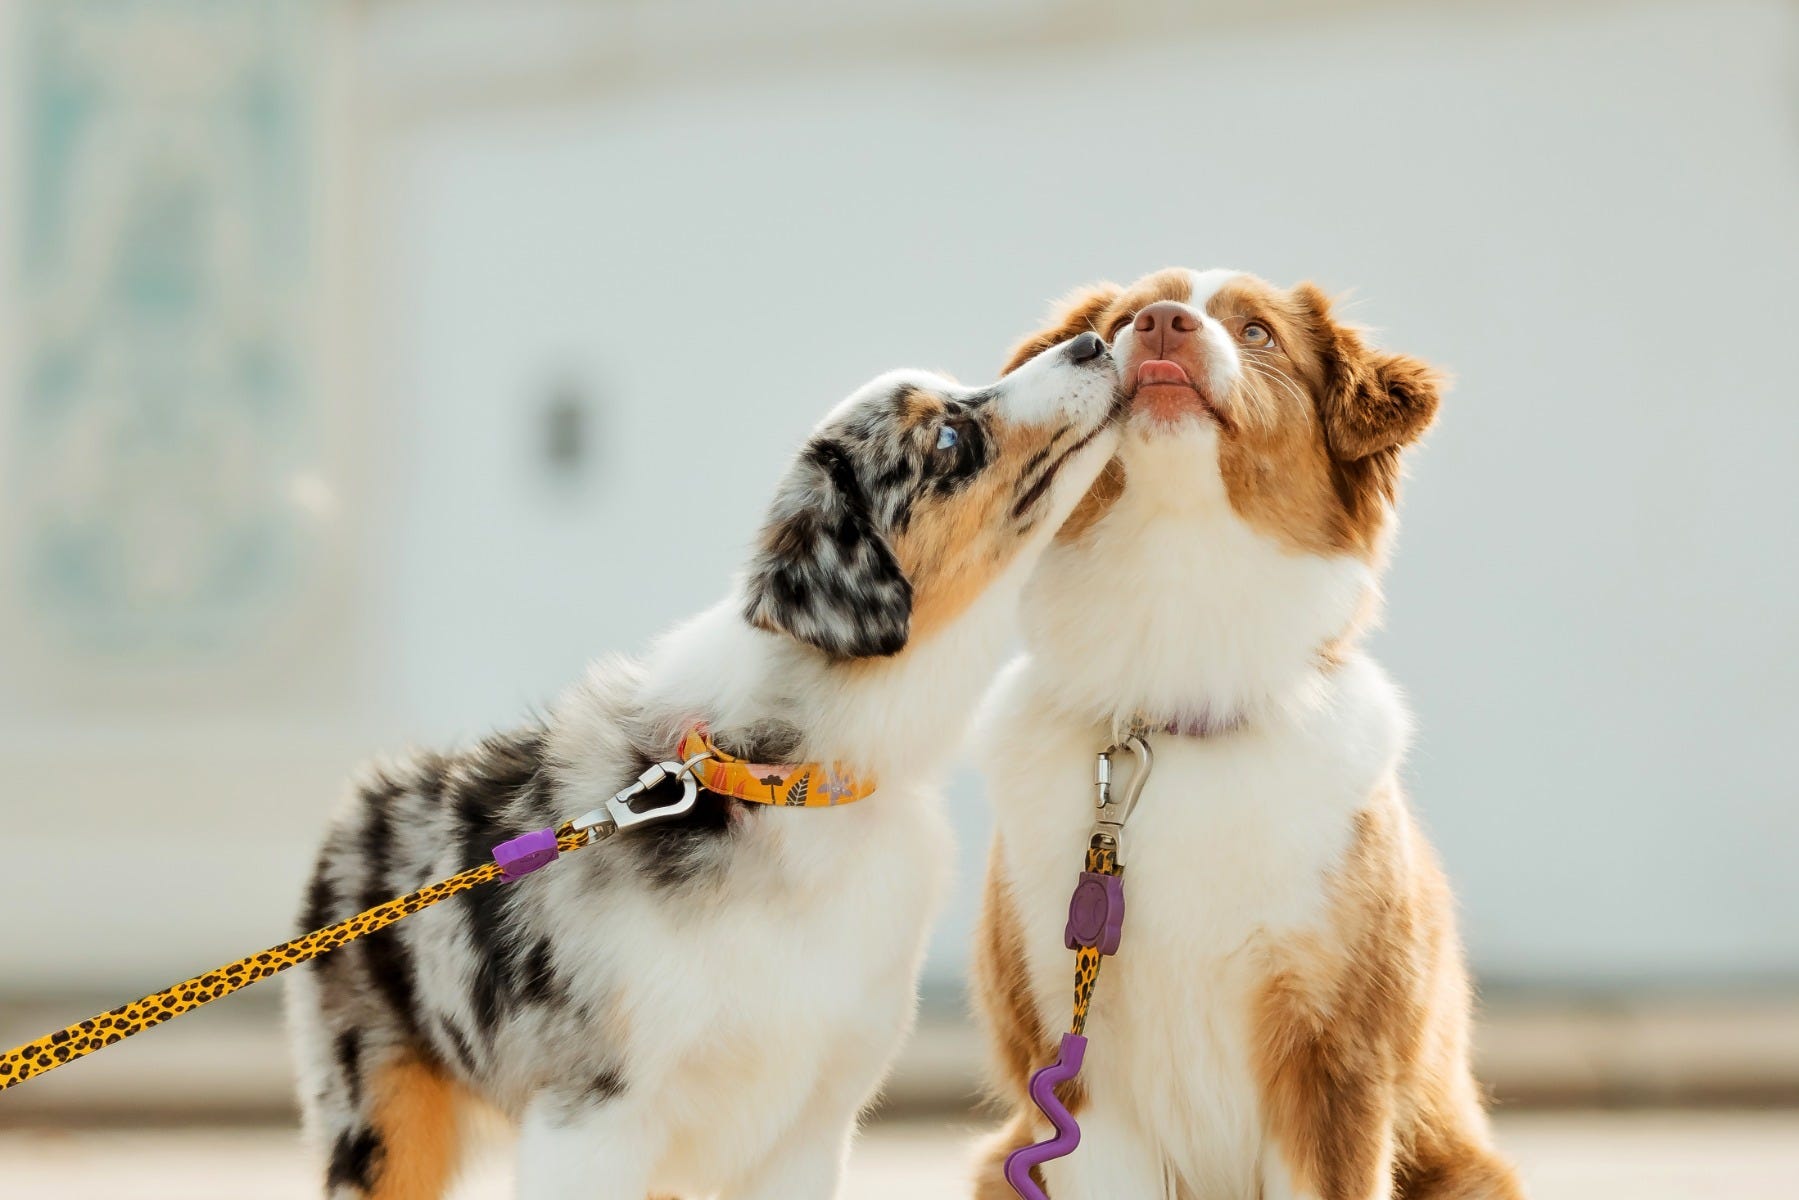 Two puppies licking each other's face | Should you spay your dog? 